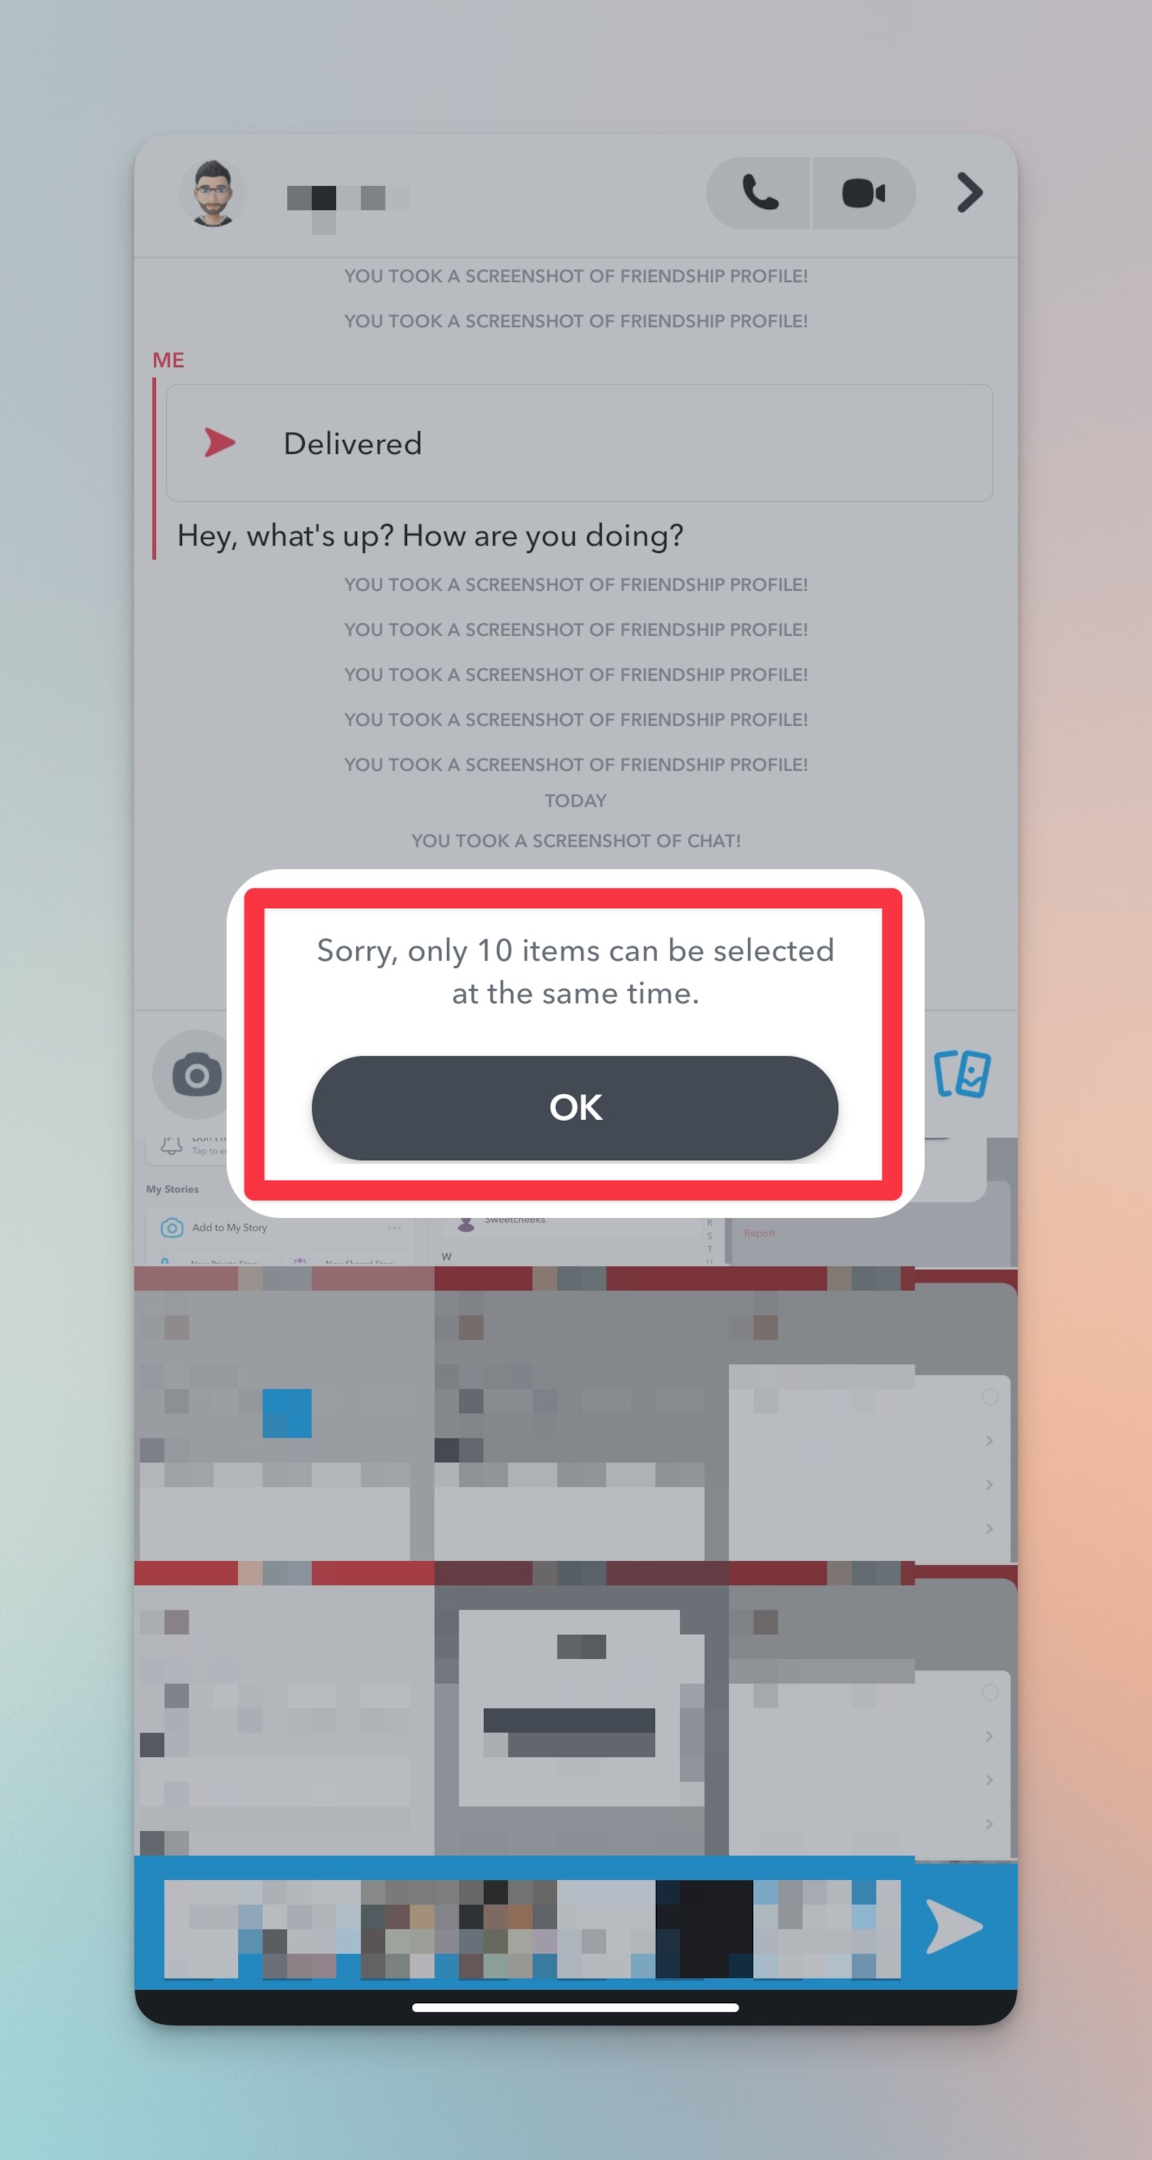 Remote.tools showing a warning that only 10 snaps can be selected for sharing in chat